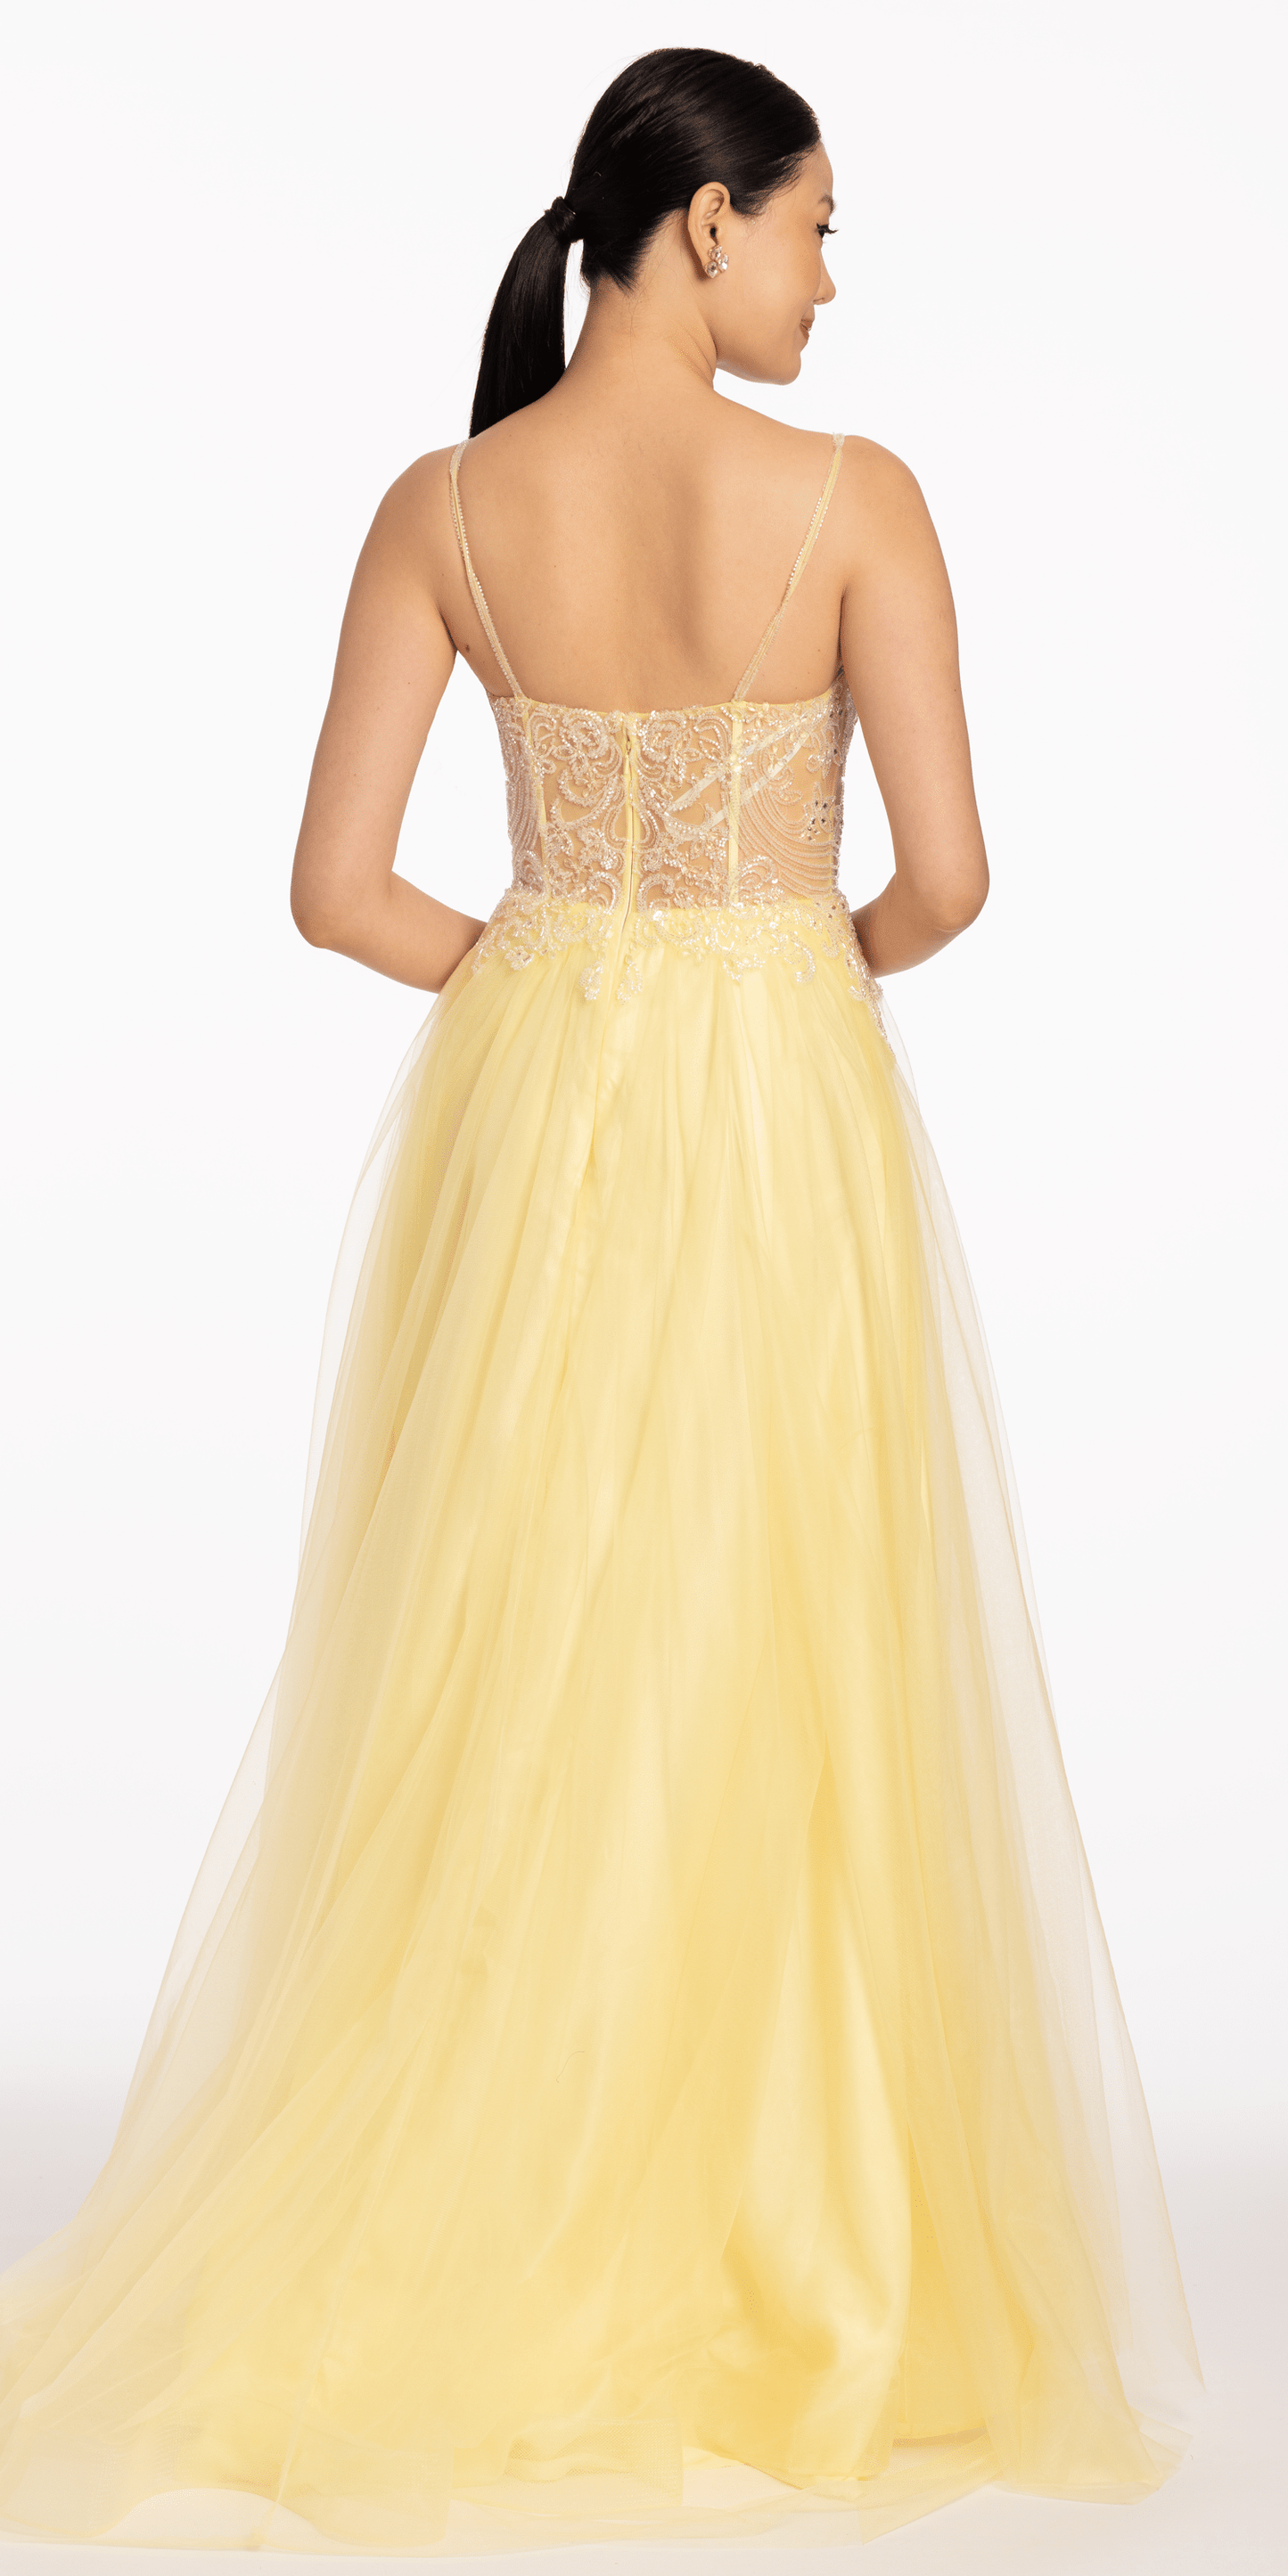 Camille La Vie Plunging Crystal Bodice Tulle Ballgown missy / 0 / light-yellow